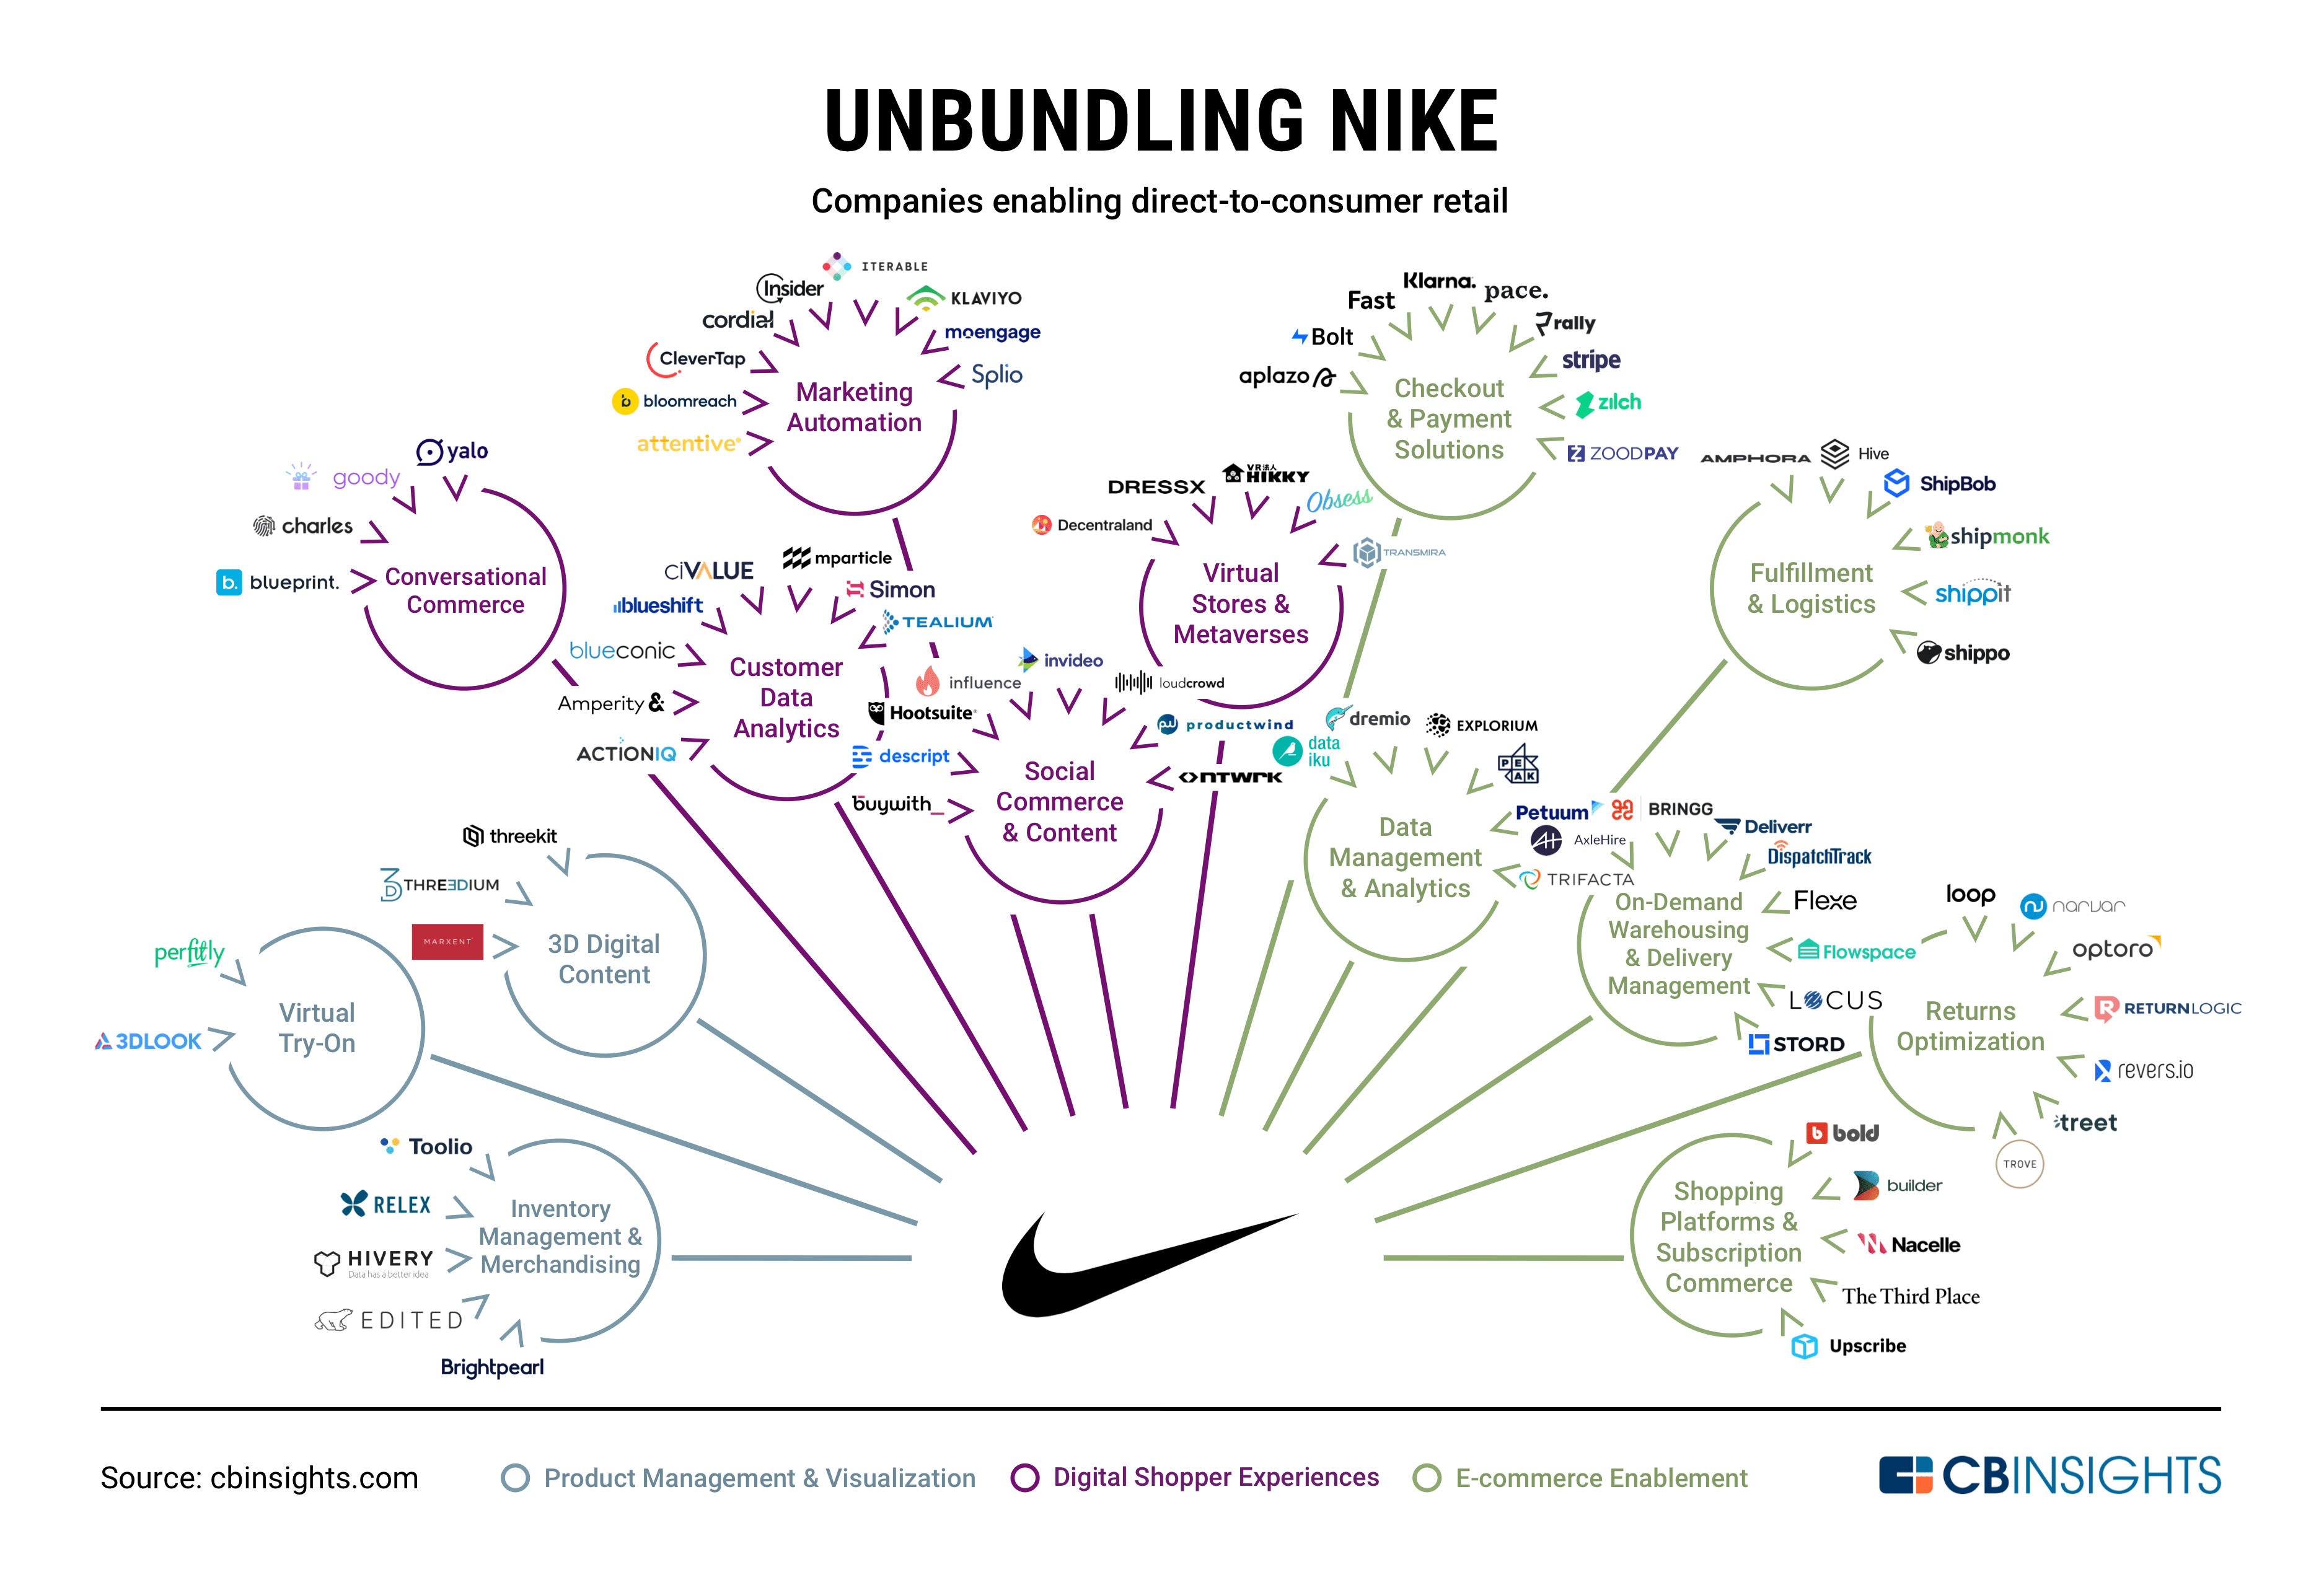 Potencial Considerar Alegre Unbundling Nike: How Direct-To-Consumer Retail Is Being Disrupted - CB  Insights Research